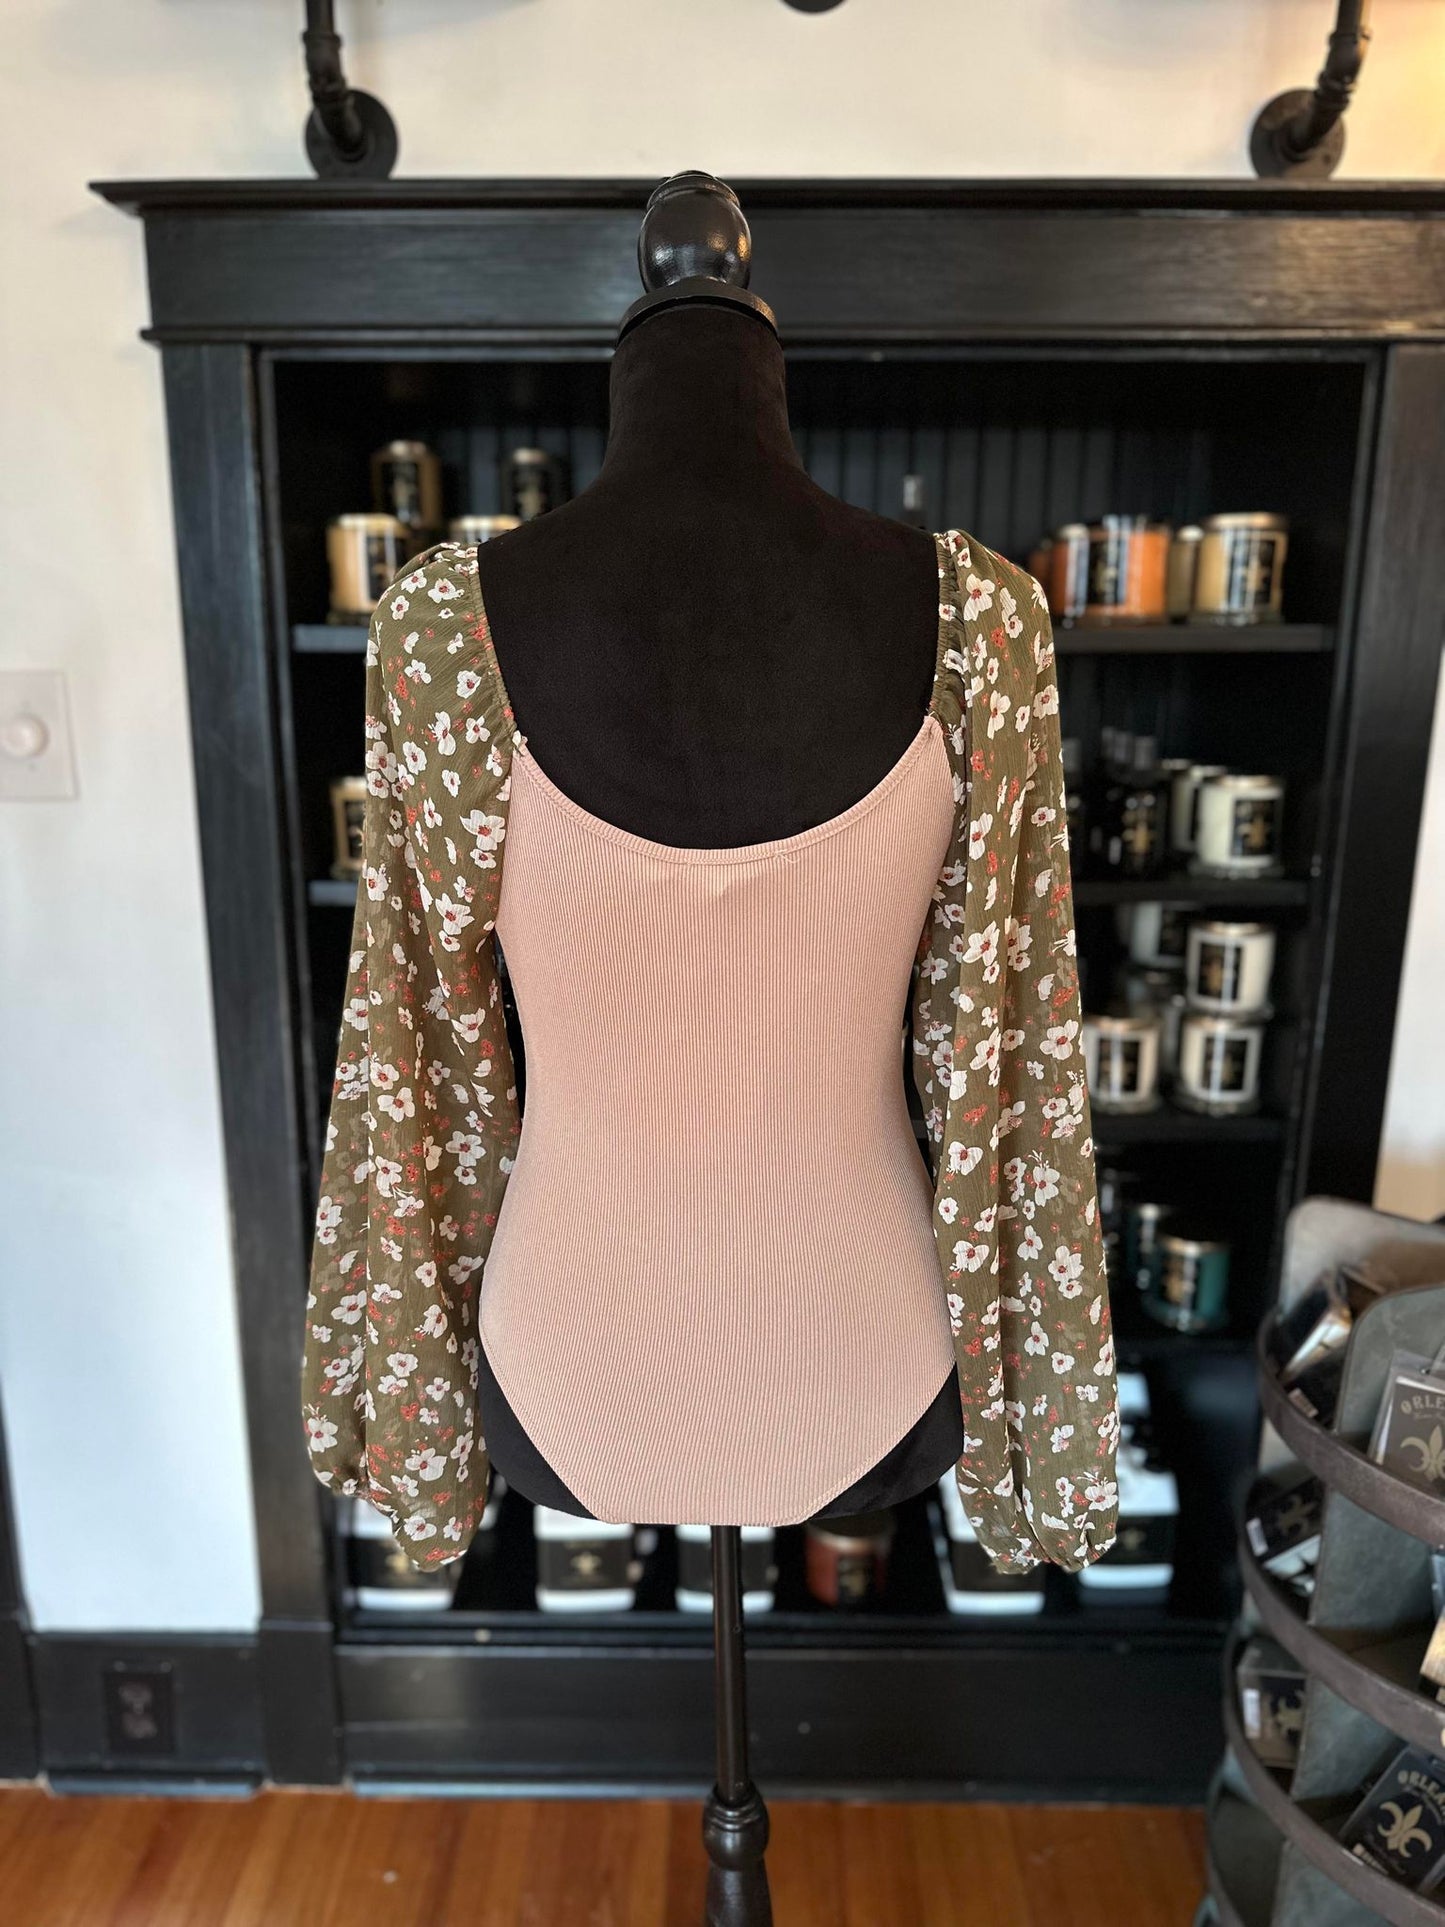 Mocha Body Suit W/ Floral Scarf Sleeves